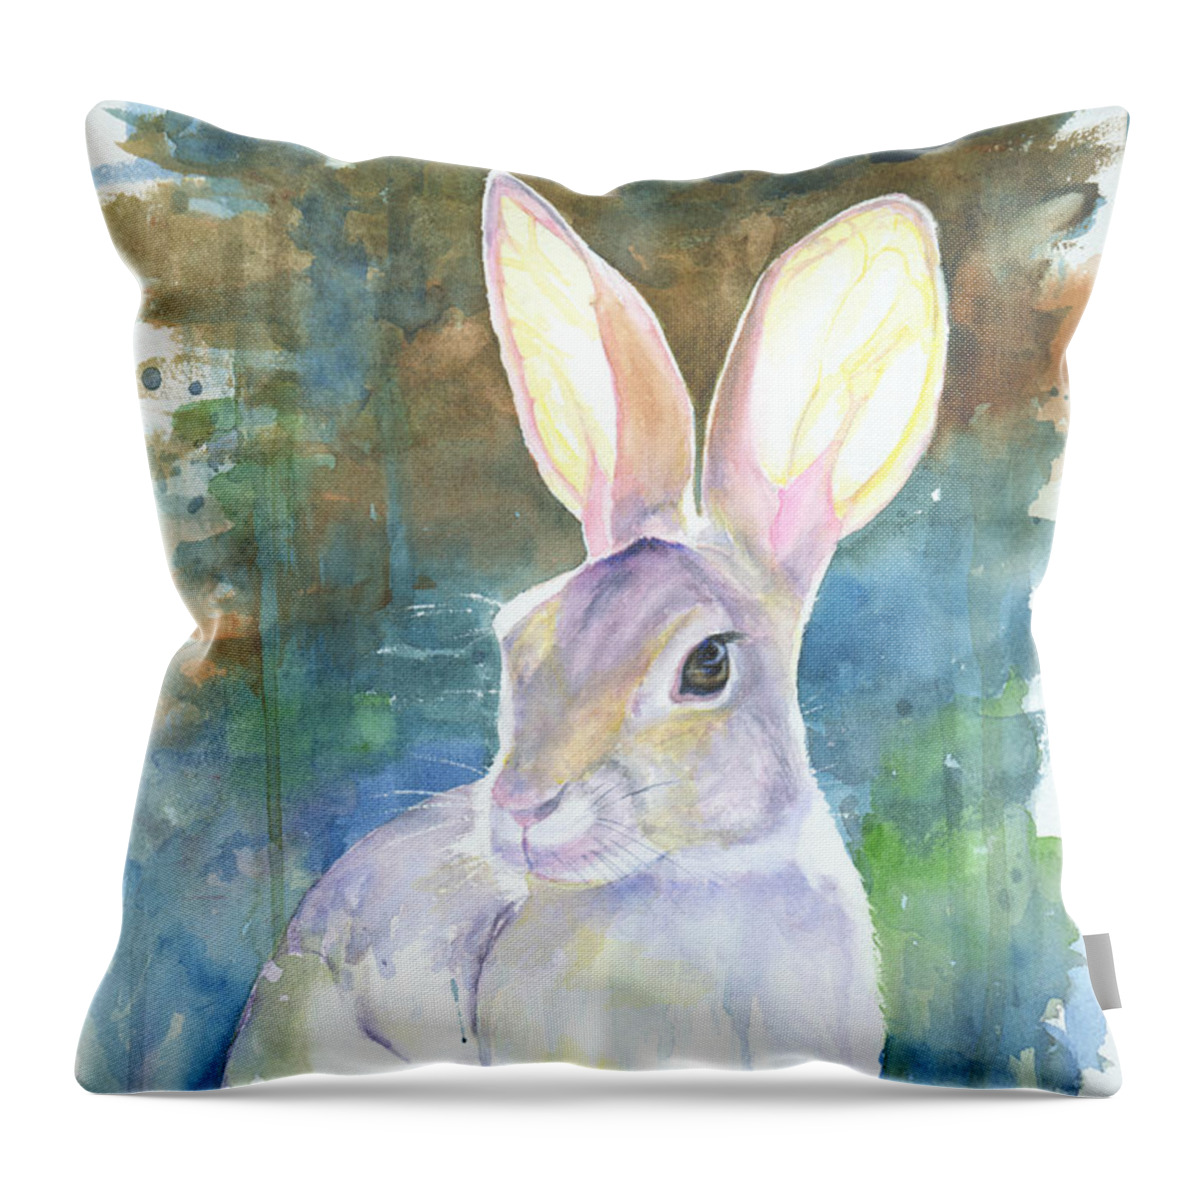 Bunny Throw Pillow featuring the painting Sunny Bunny by Marsha Karle